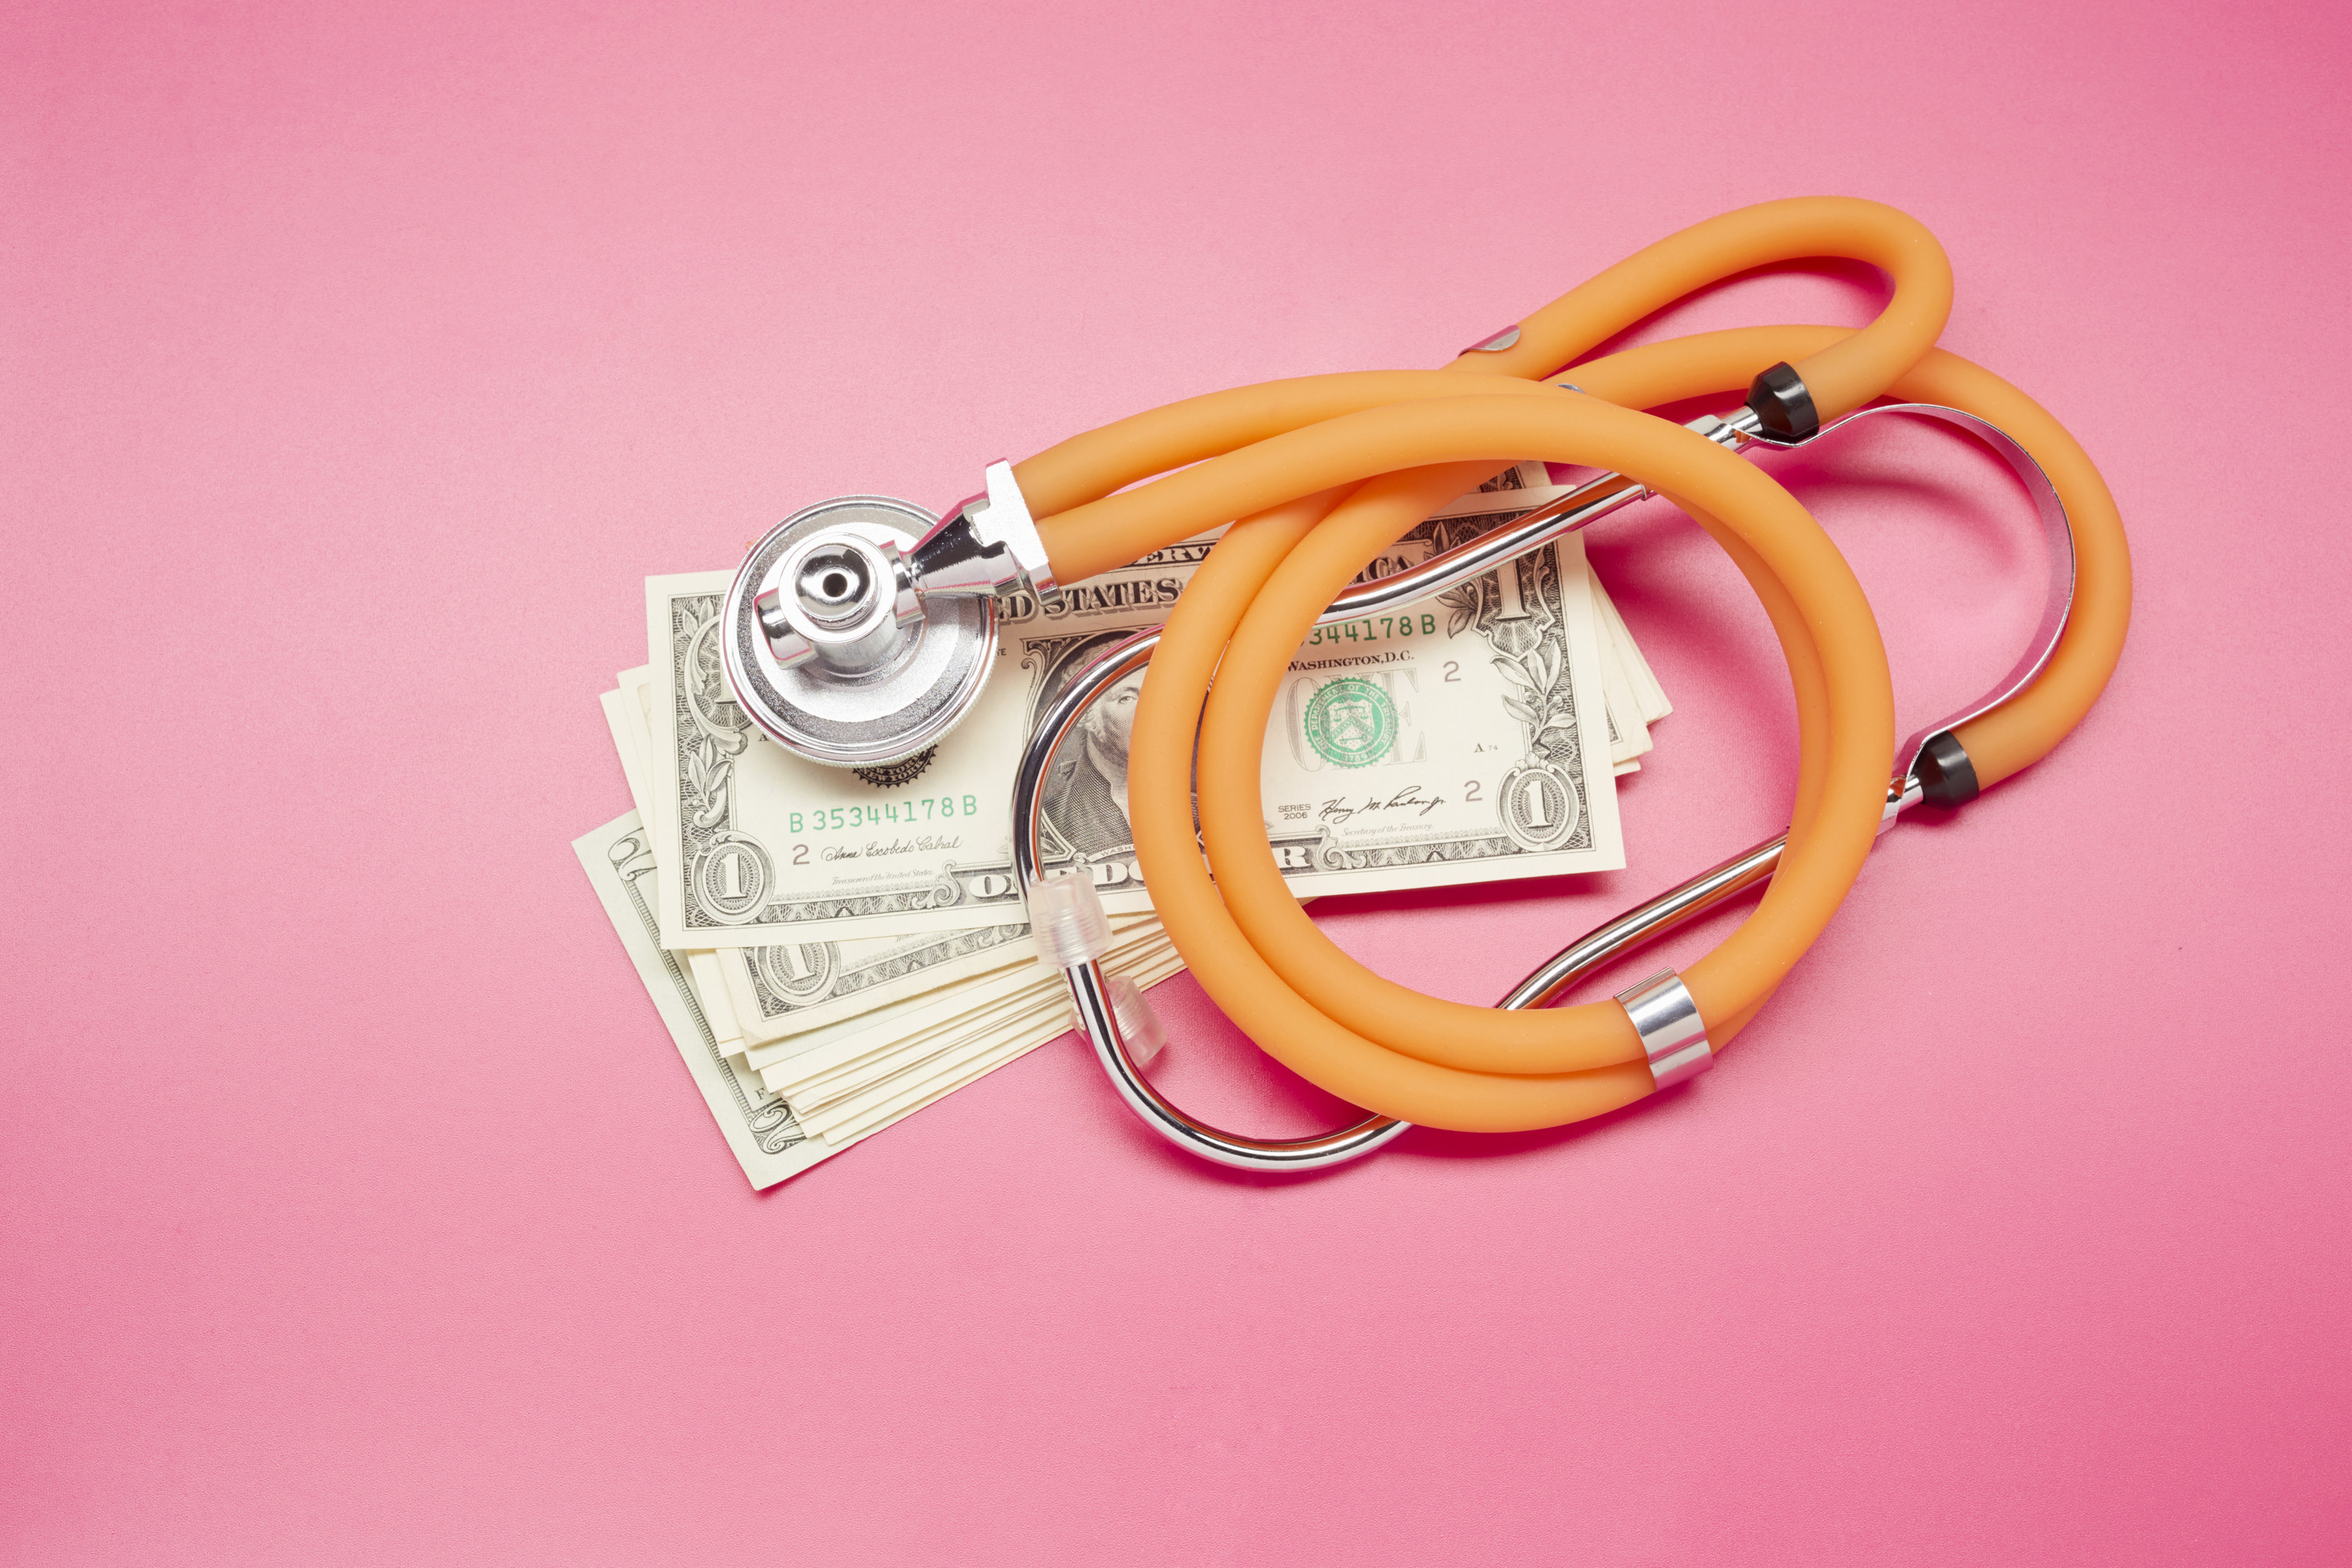 An image of a stethoscope on top of a pile of money on a pink background